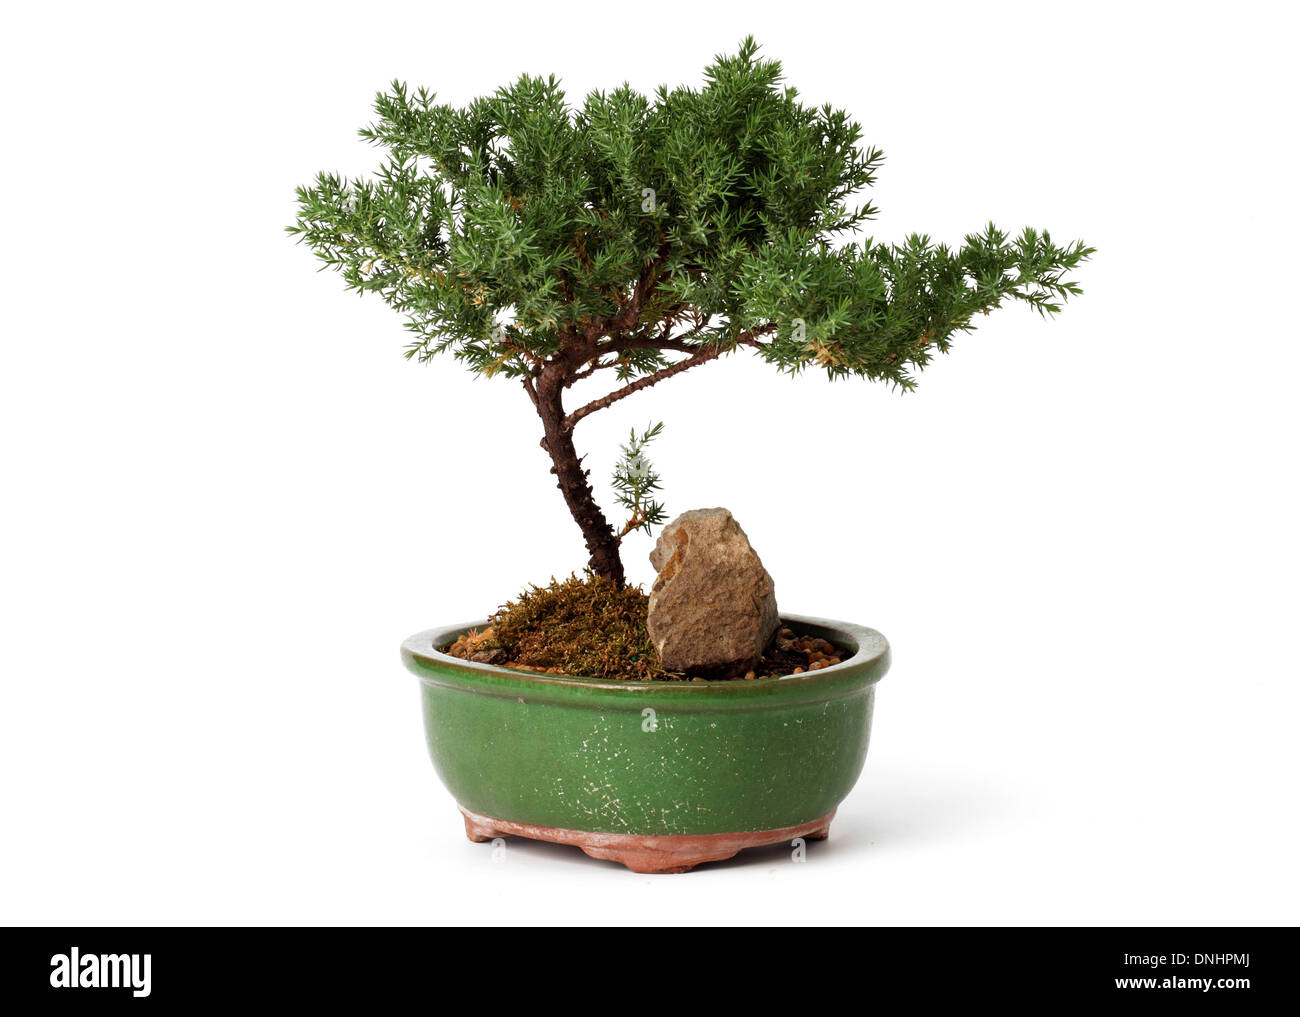 A small bonsai plant in a container on a white background Stock Photo